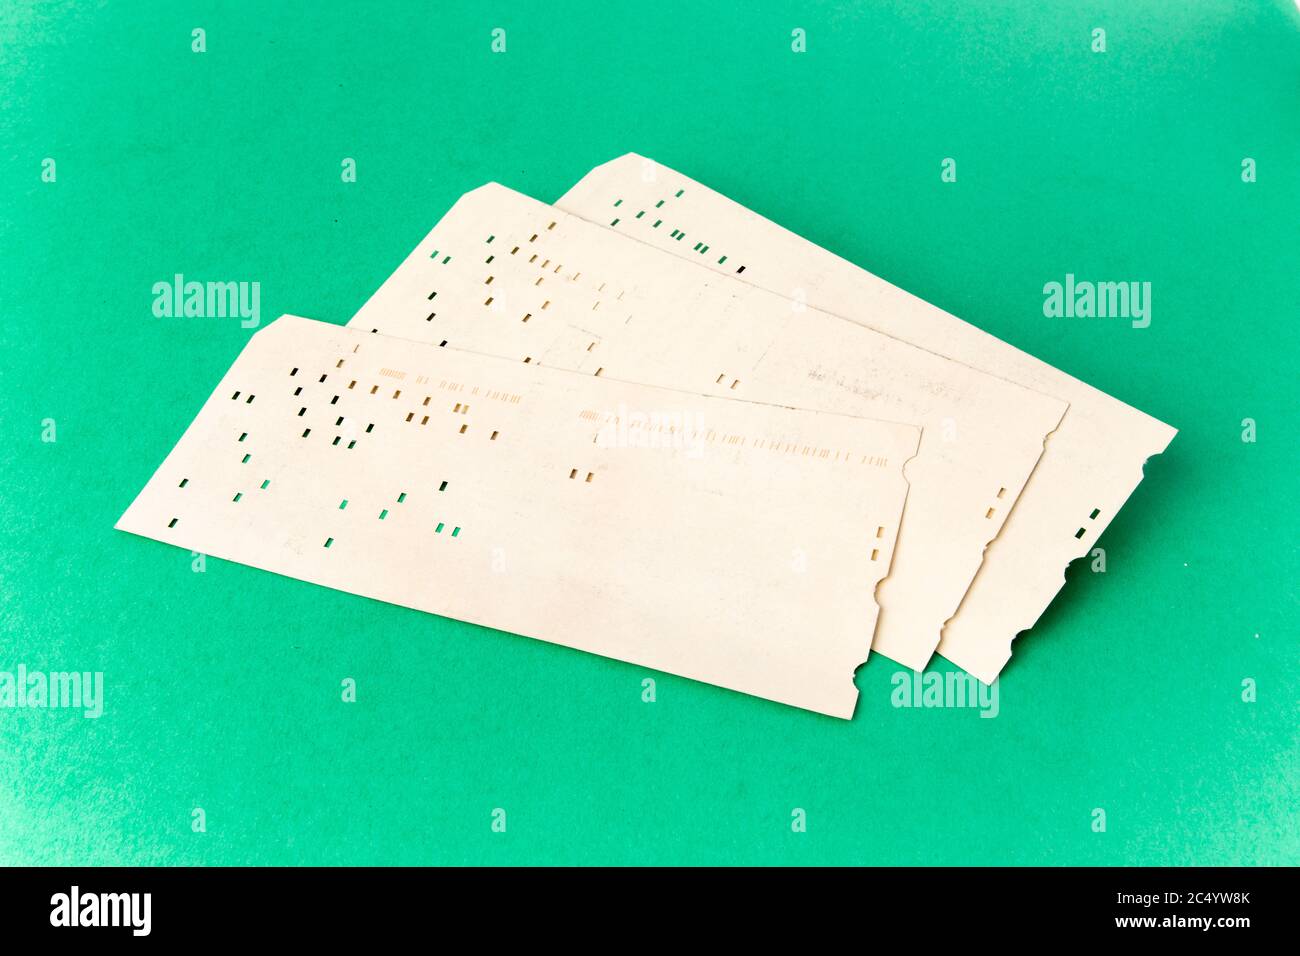 computer history - 80 column computer keypunch cards on a green background Stock Photo